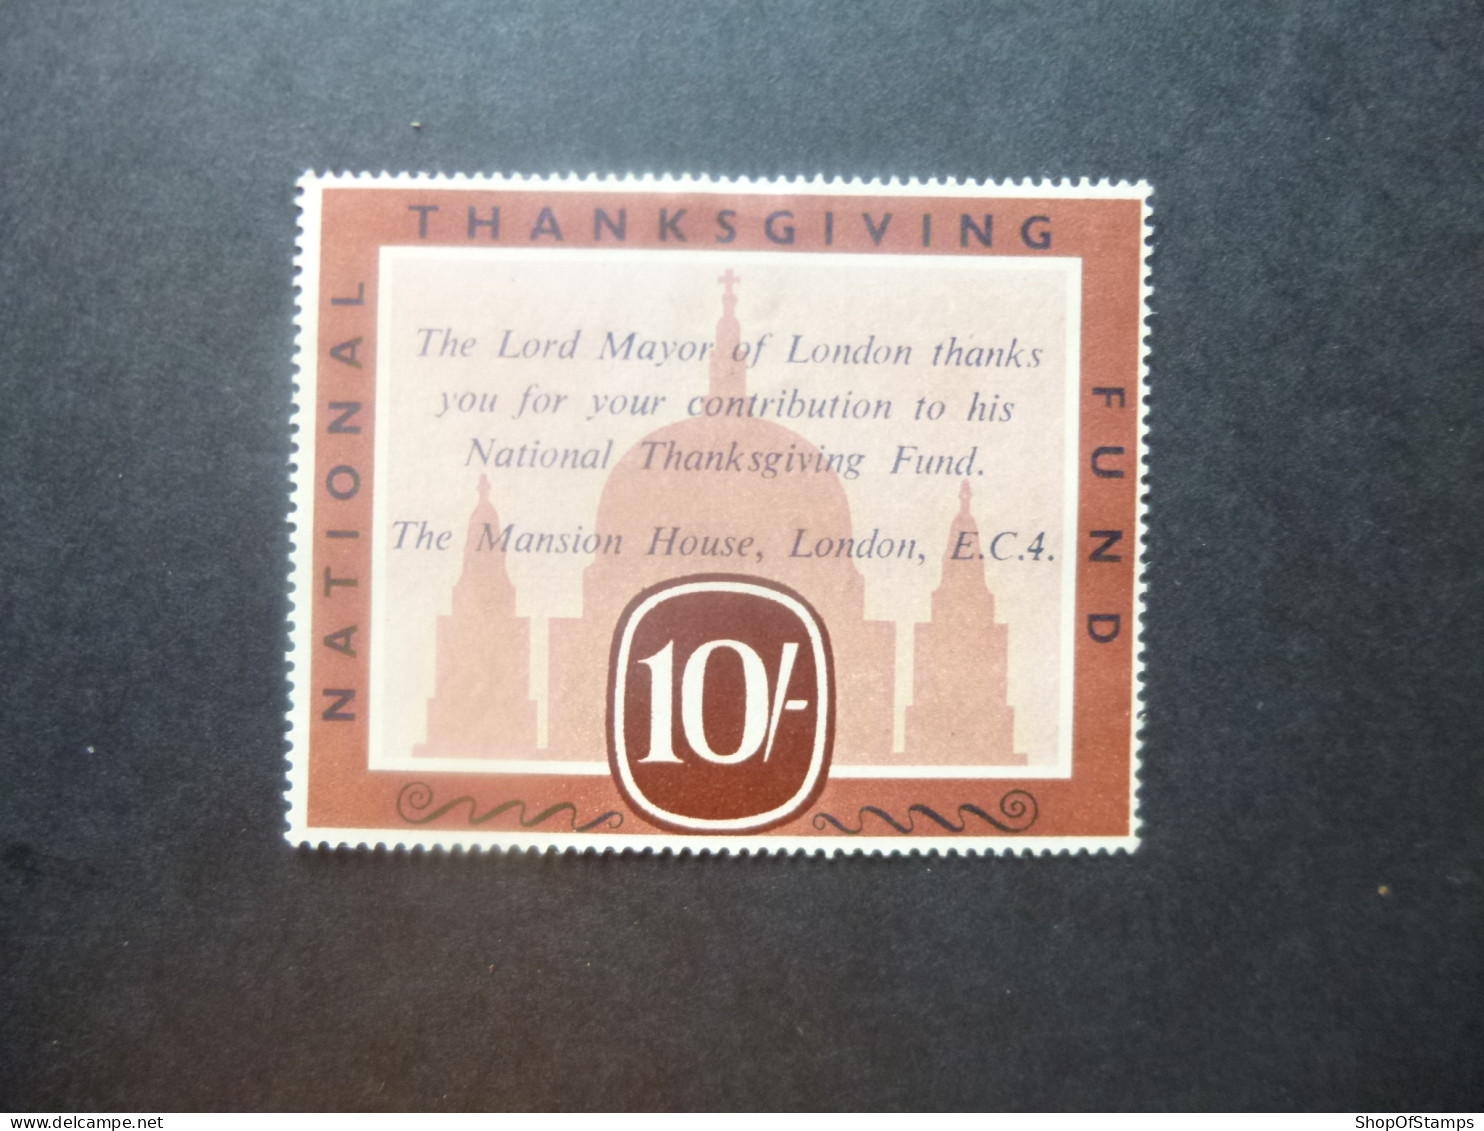 GREAT BRITAIN LABEL NATIONAL THANKS GIVING FUND OF LORD MAYOR LONDON 10sh SG NATIONAL THANKS GIVING FUND LABEL 10s - Cinderelas